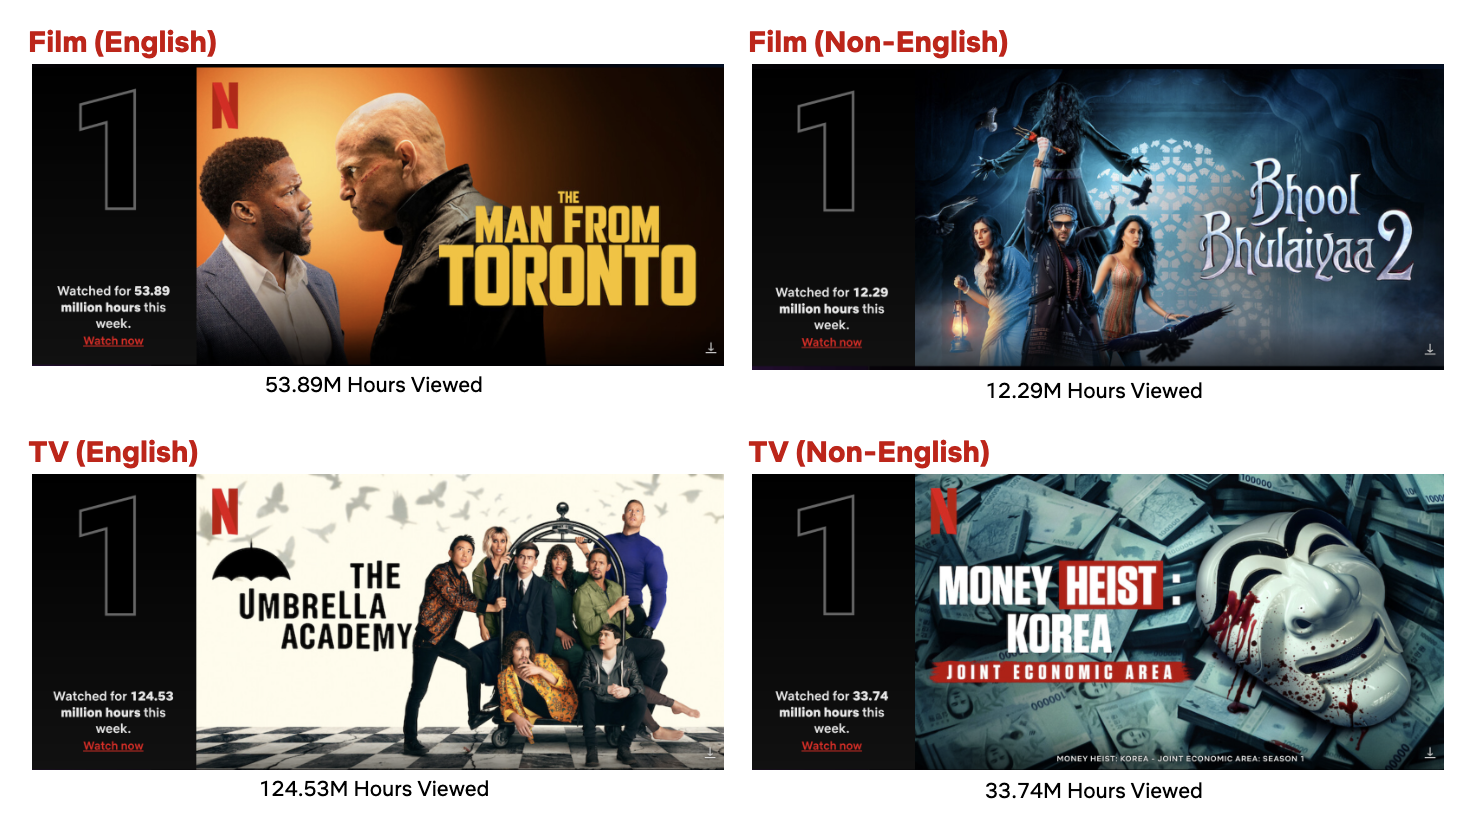 Top 10 Week of June 20: ‘The Umbrella Academy’ Is This Week’s Most Viewed Title,  ‘The Man From Toronto’ Is the #1 Film